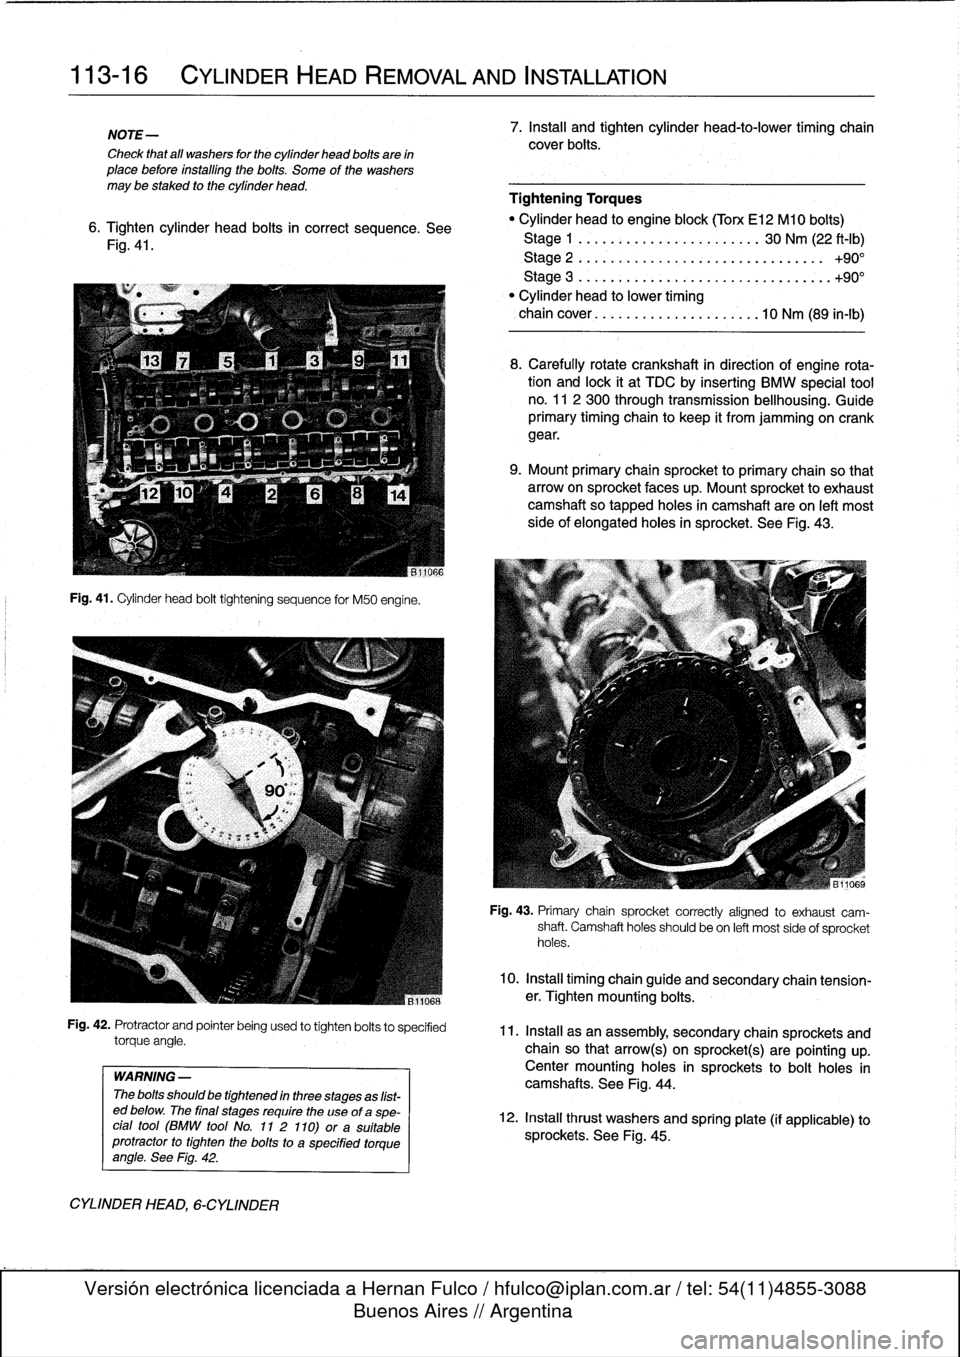 BMW M3 1993 E36 Owners Manual 
113-16

	

CYLINDER
HEAD
REMOVAL
AND
INSTALLATION

NOTE-

Check
that
all
washers
for
the
cylinder
head
bolts
are
in
place
before
installlng
the
bolts
.
Some
of
the
washers
may
be
staked
to
the
cylind